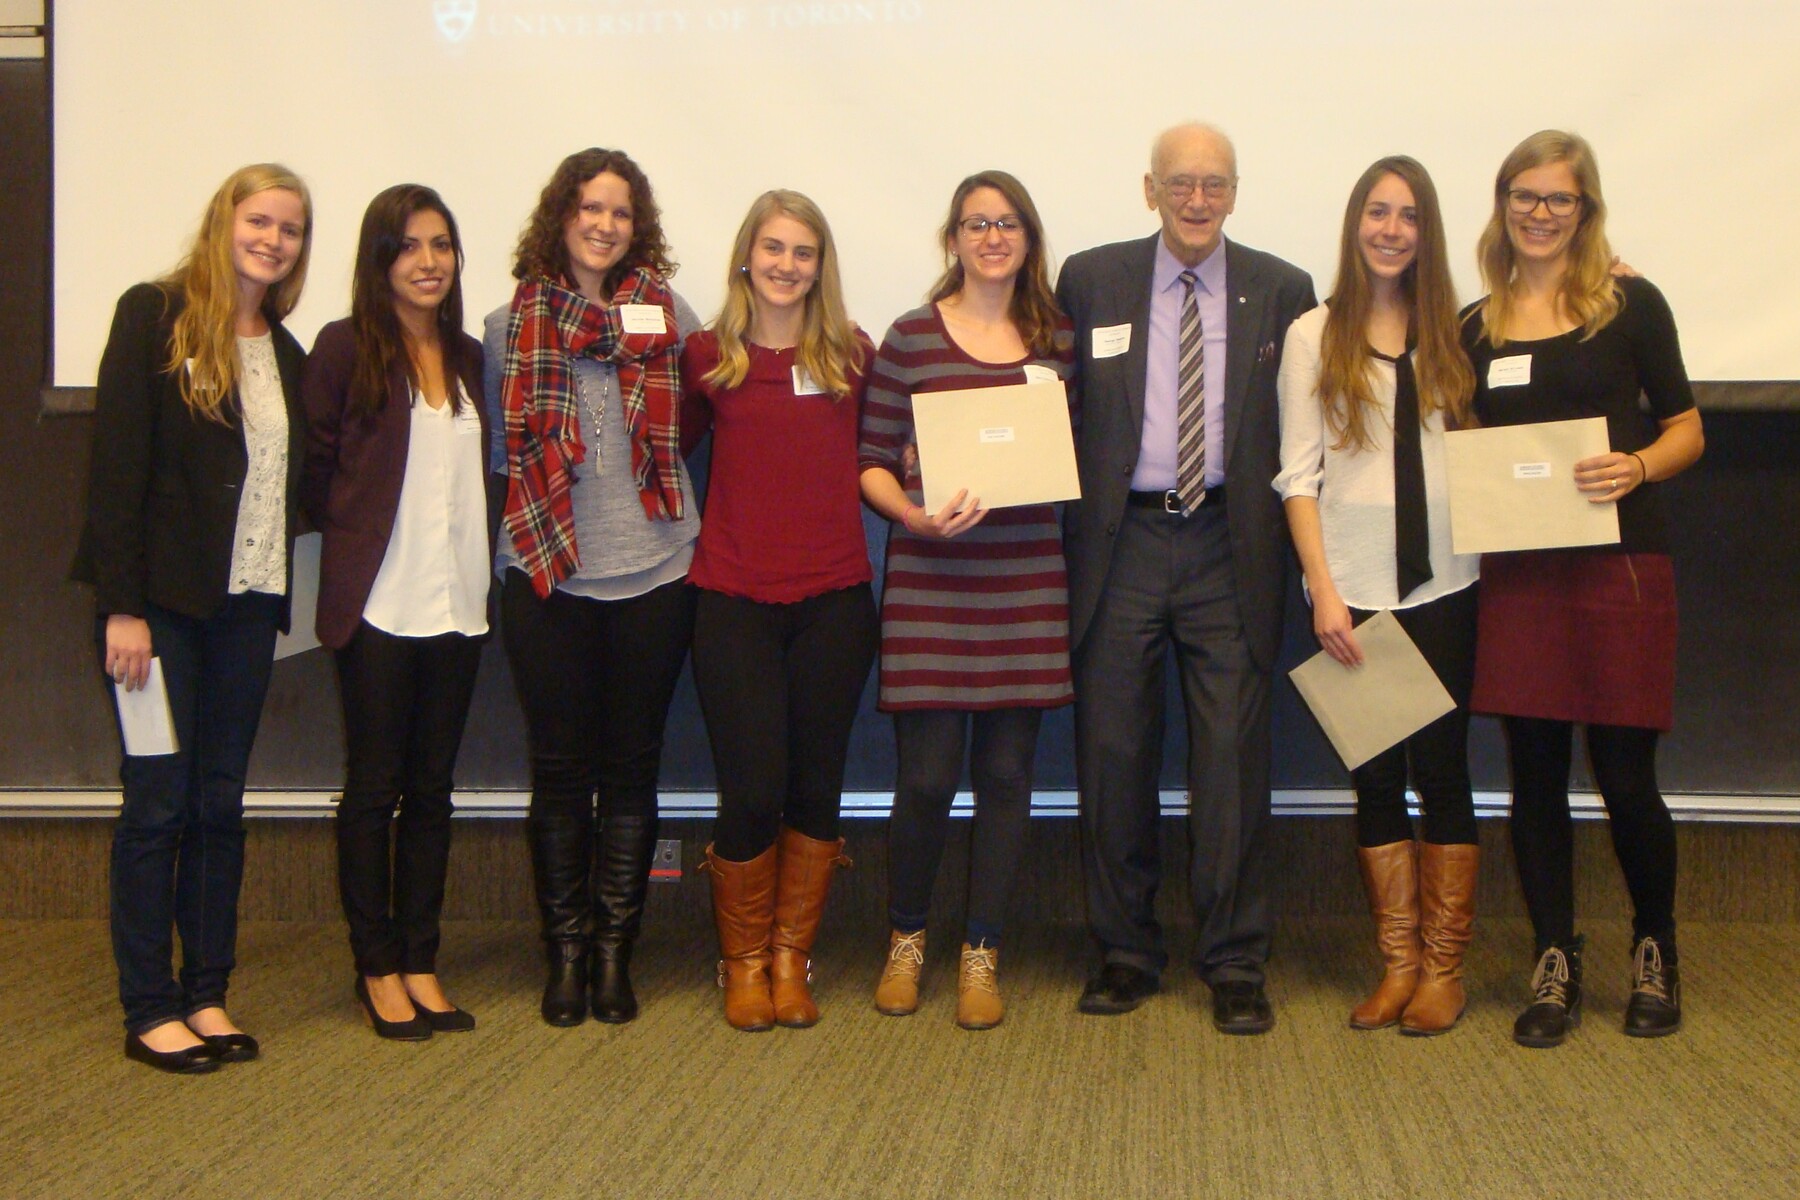 Group photo of George Shields with students from the Department of Speech-Language Pathology in 2015